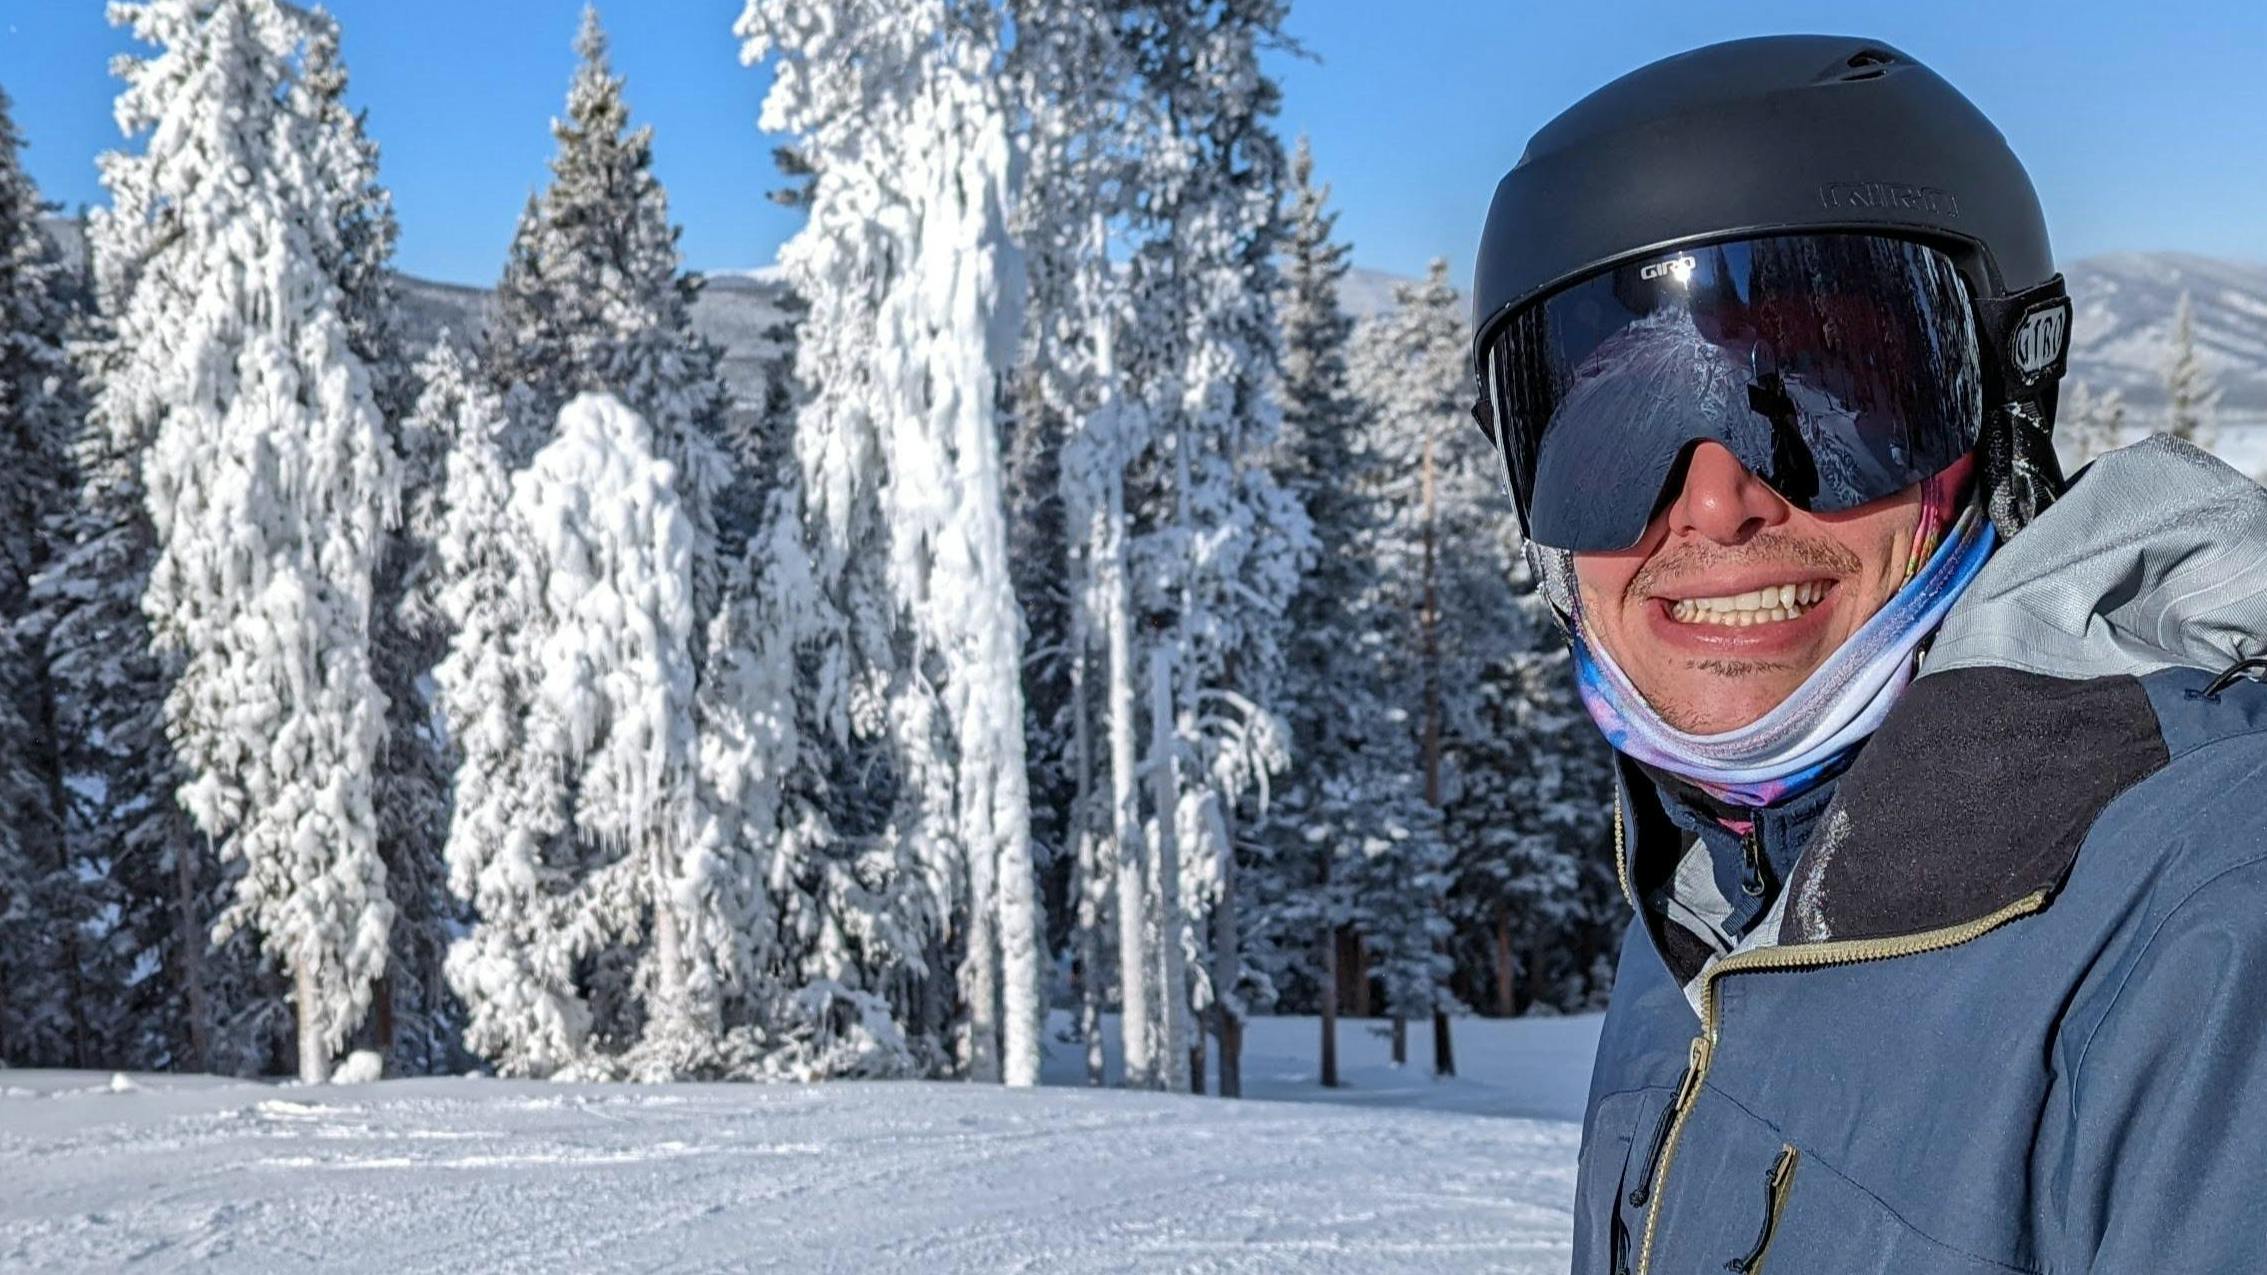 A skier standing on a snowy run with snowy mountains in the background wearing the Giro Contour Goggles.